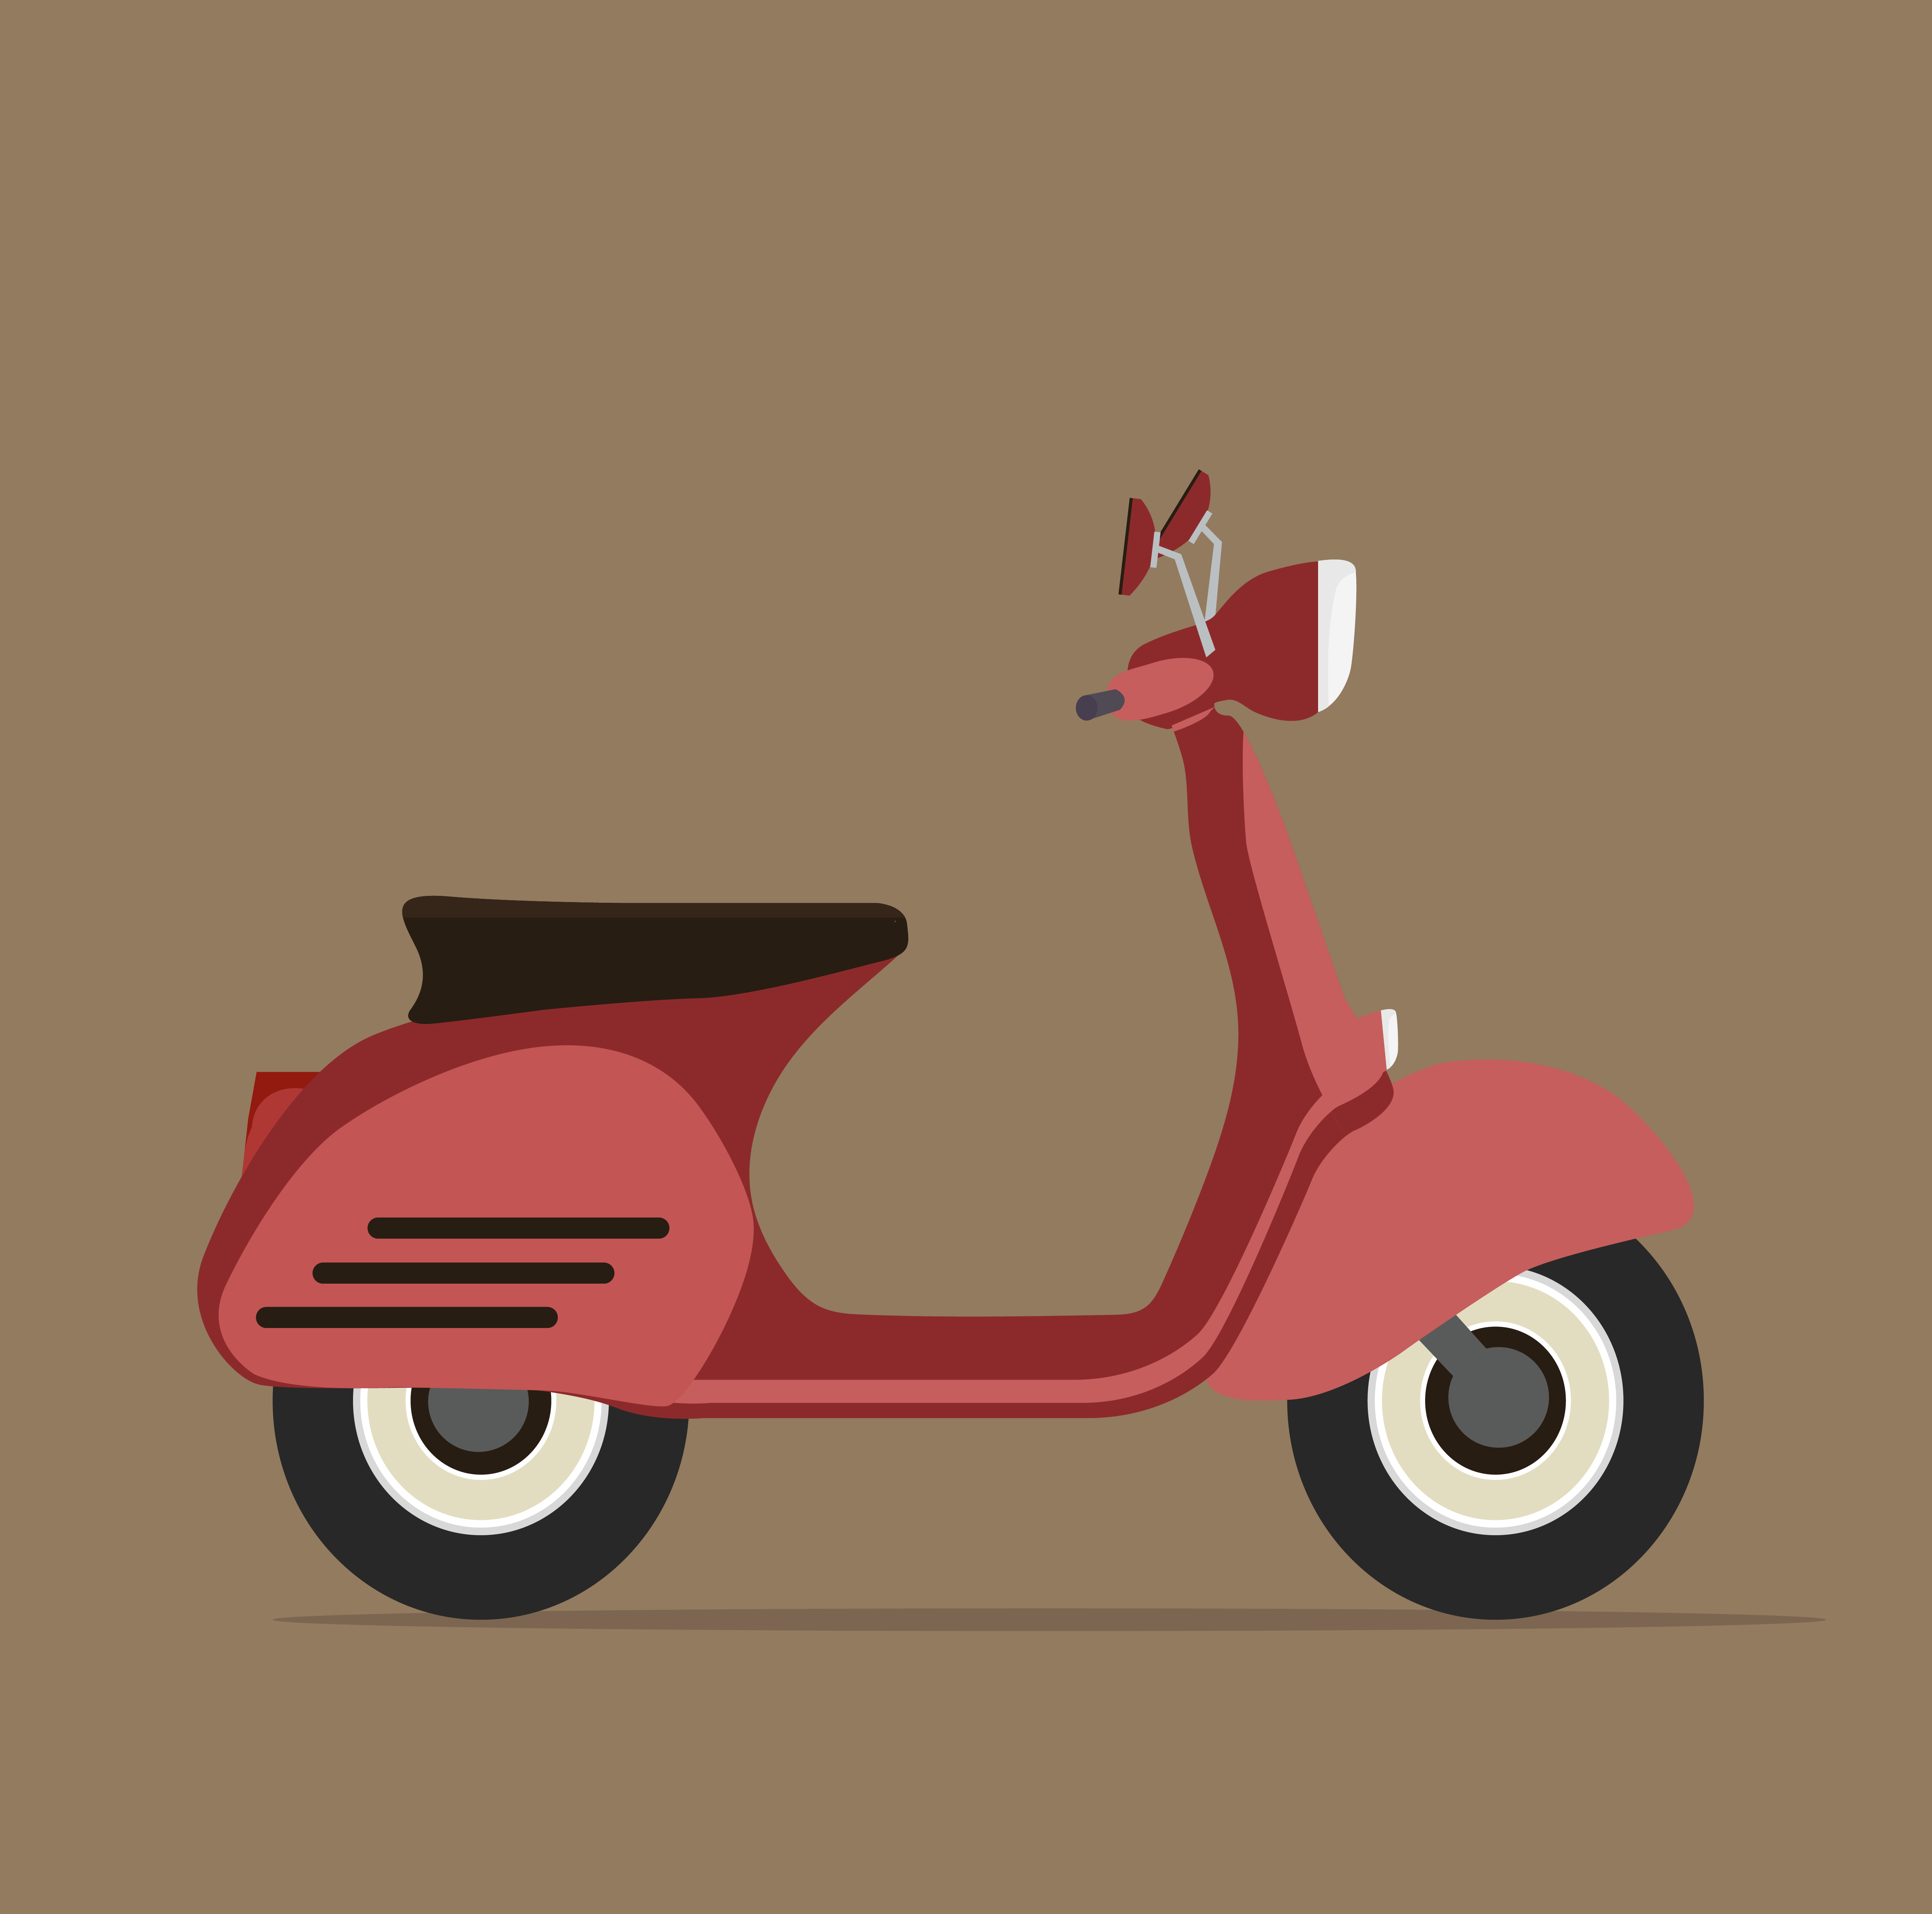 Cool red motorcycle Flat design Download Free Vectors 